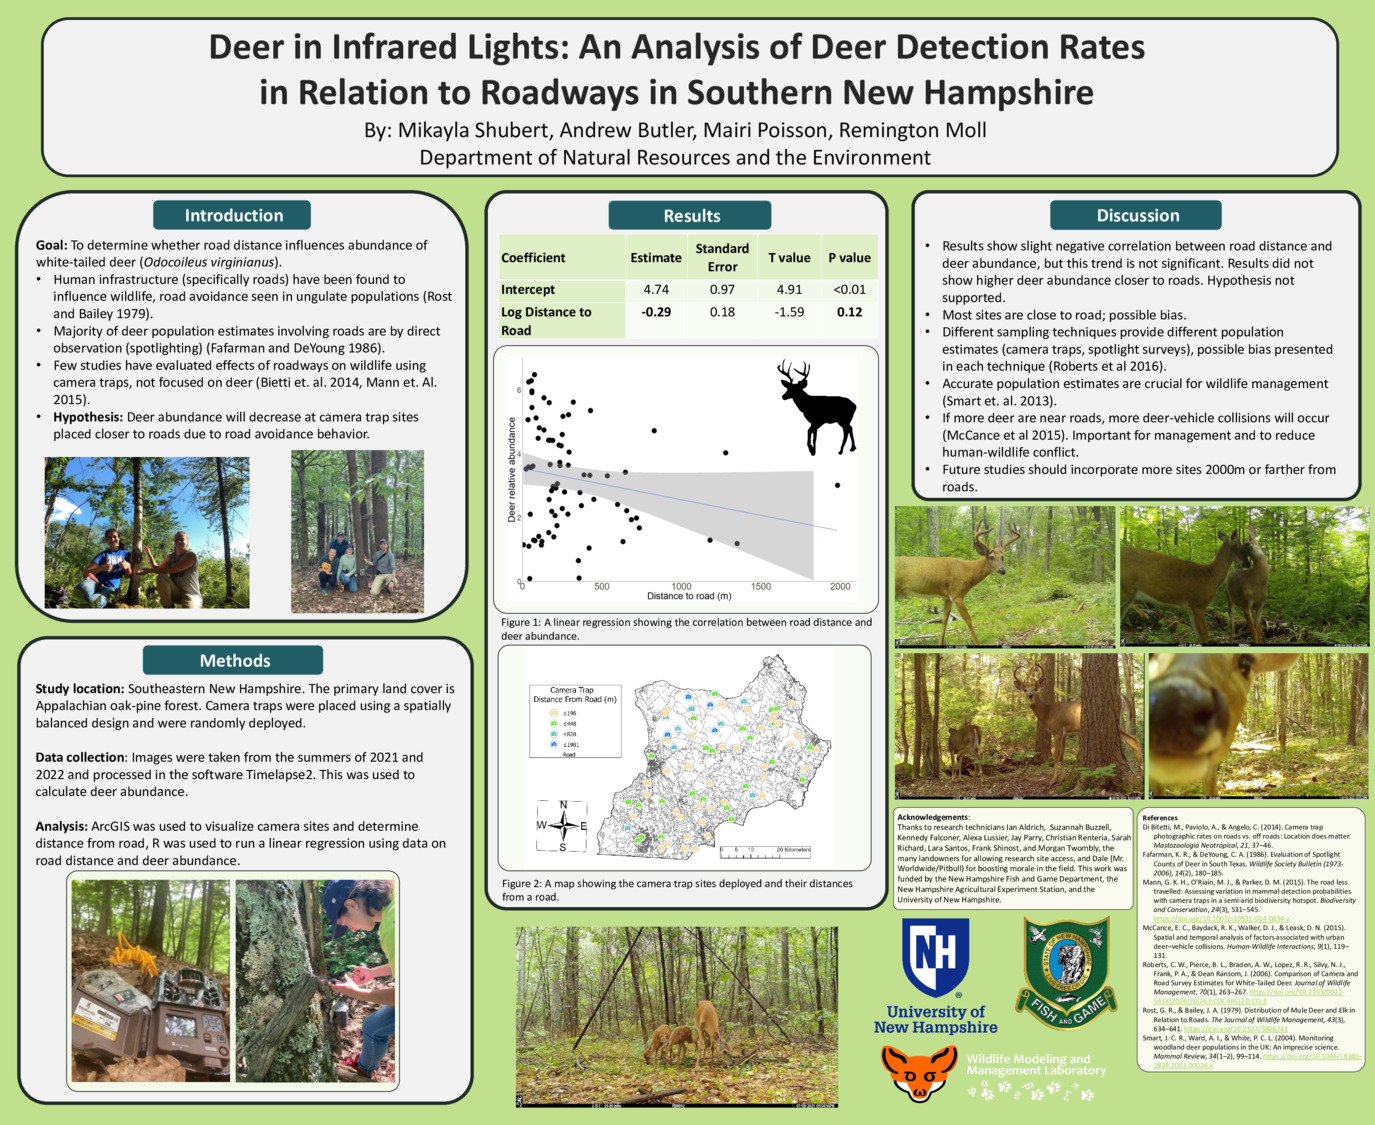 Deer In Infrared Lights: An Analysis Of Deer Detection Rates In Relation To Roadways In Southern New Hampshire by ms1742